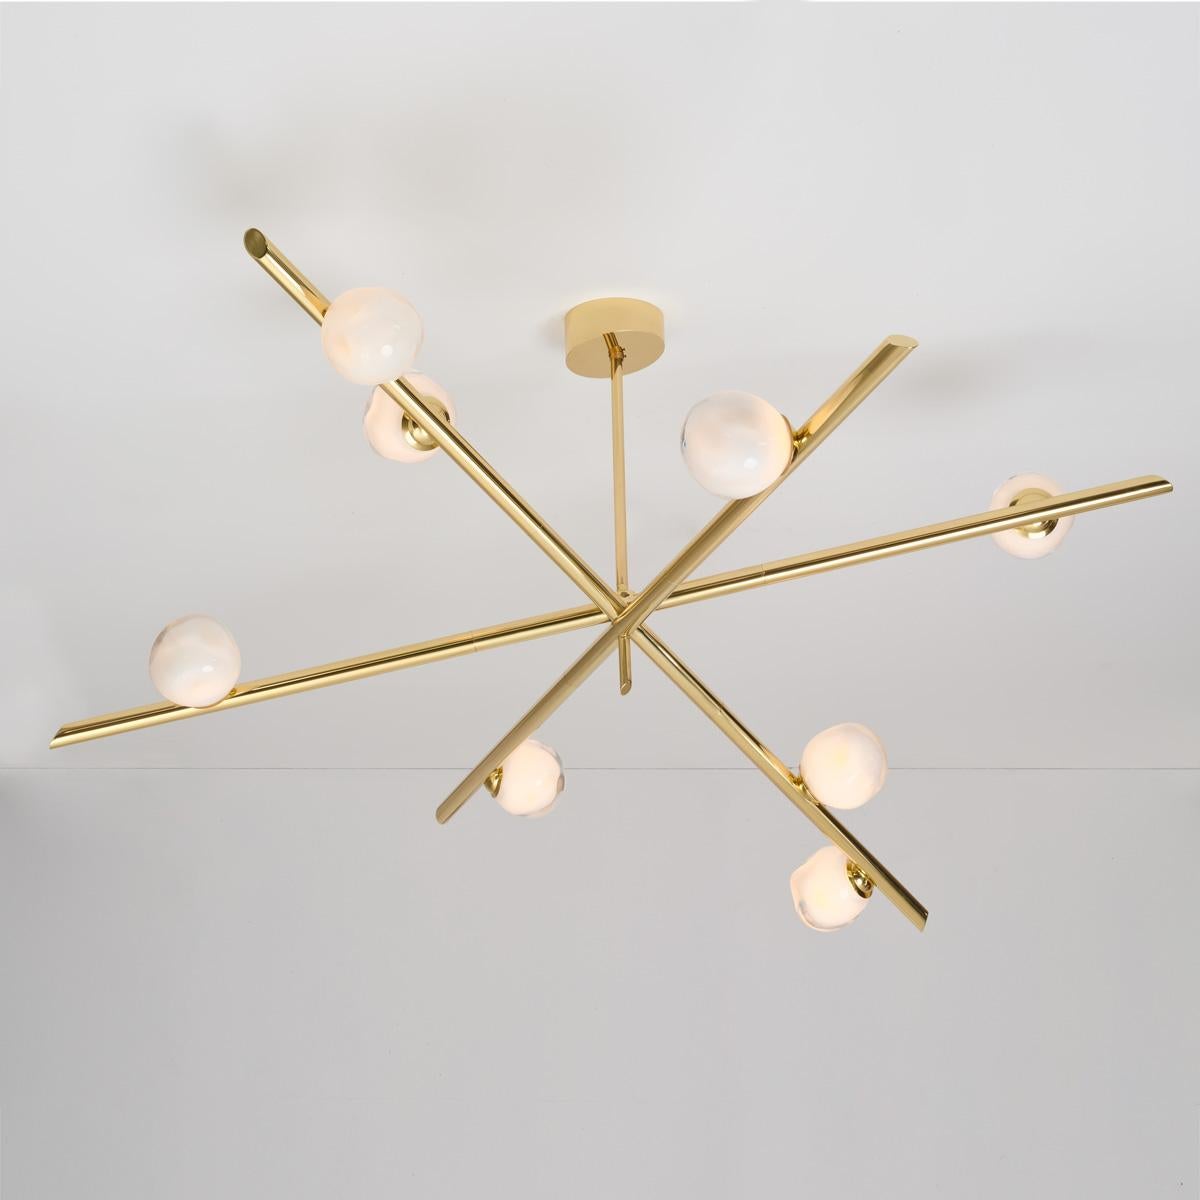 The Antares X3 ceiling light harmoniously balances the linear details of its intersecting arms with the organic form of its handblown glass shades. The first images show the fixture in our polished brass finish-subsequent pictures show it in a